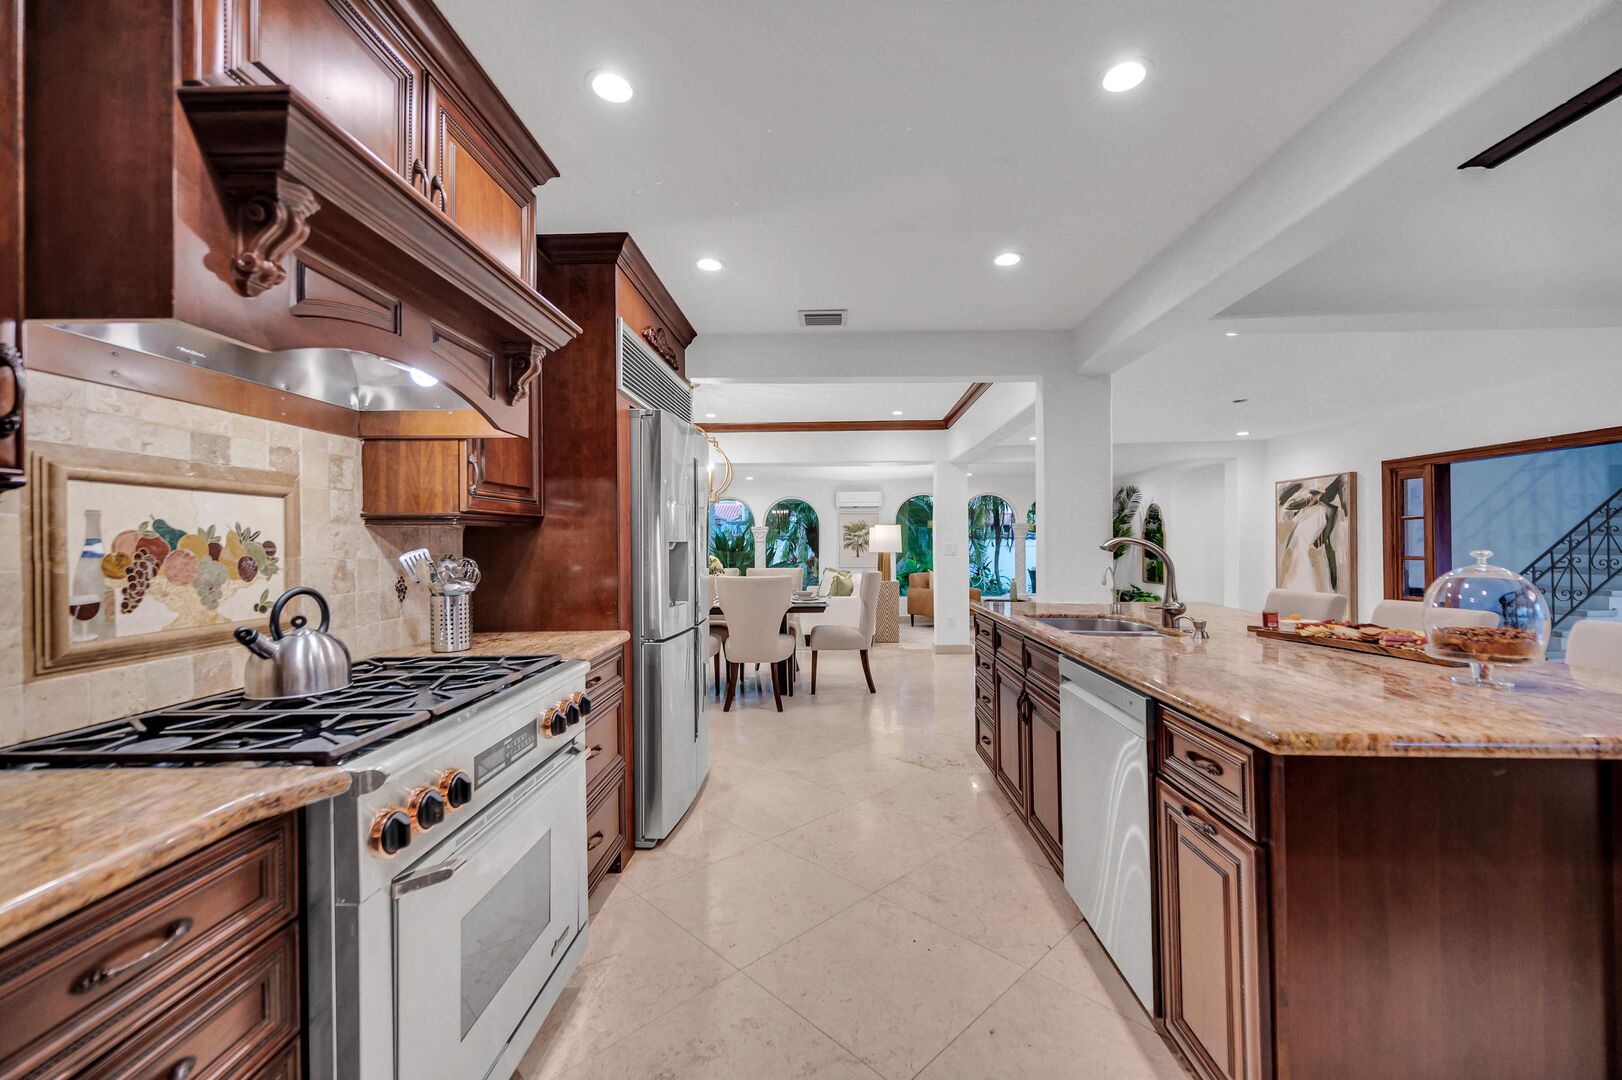 The open gourmet kitchen features bar seating for three, a breakfast nook overlooking the heated pool.